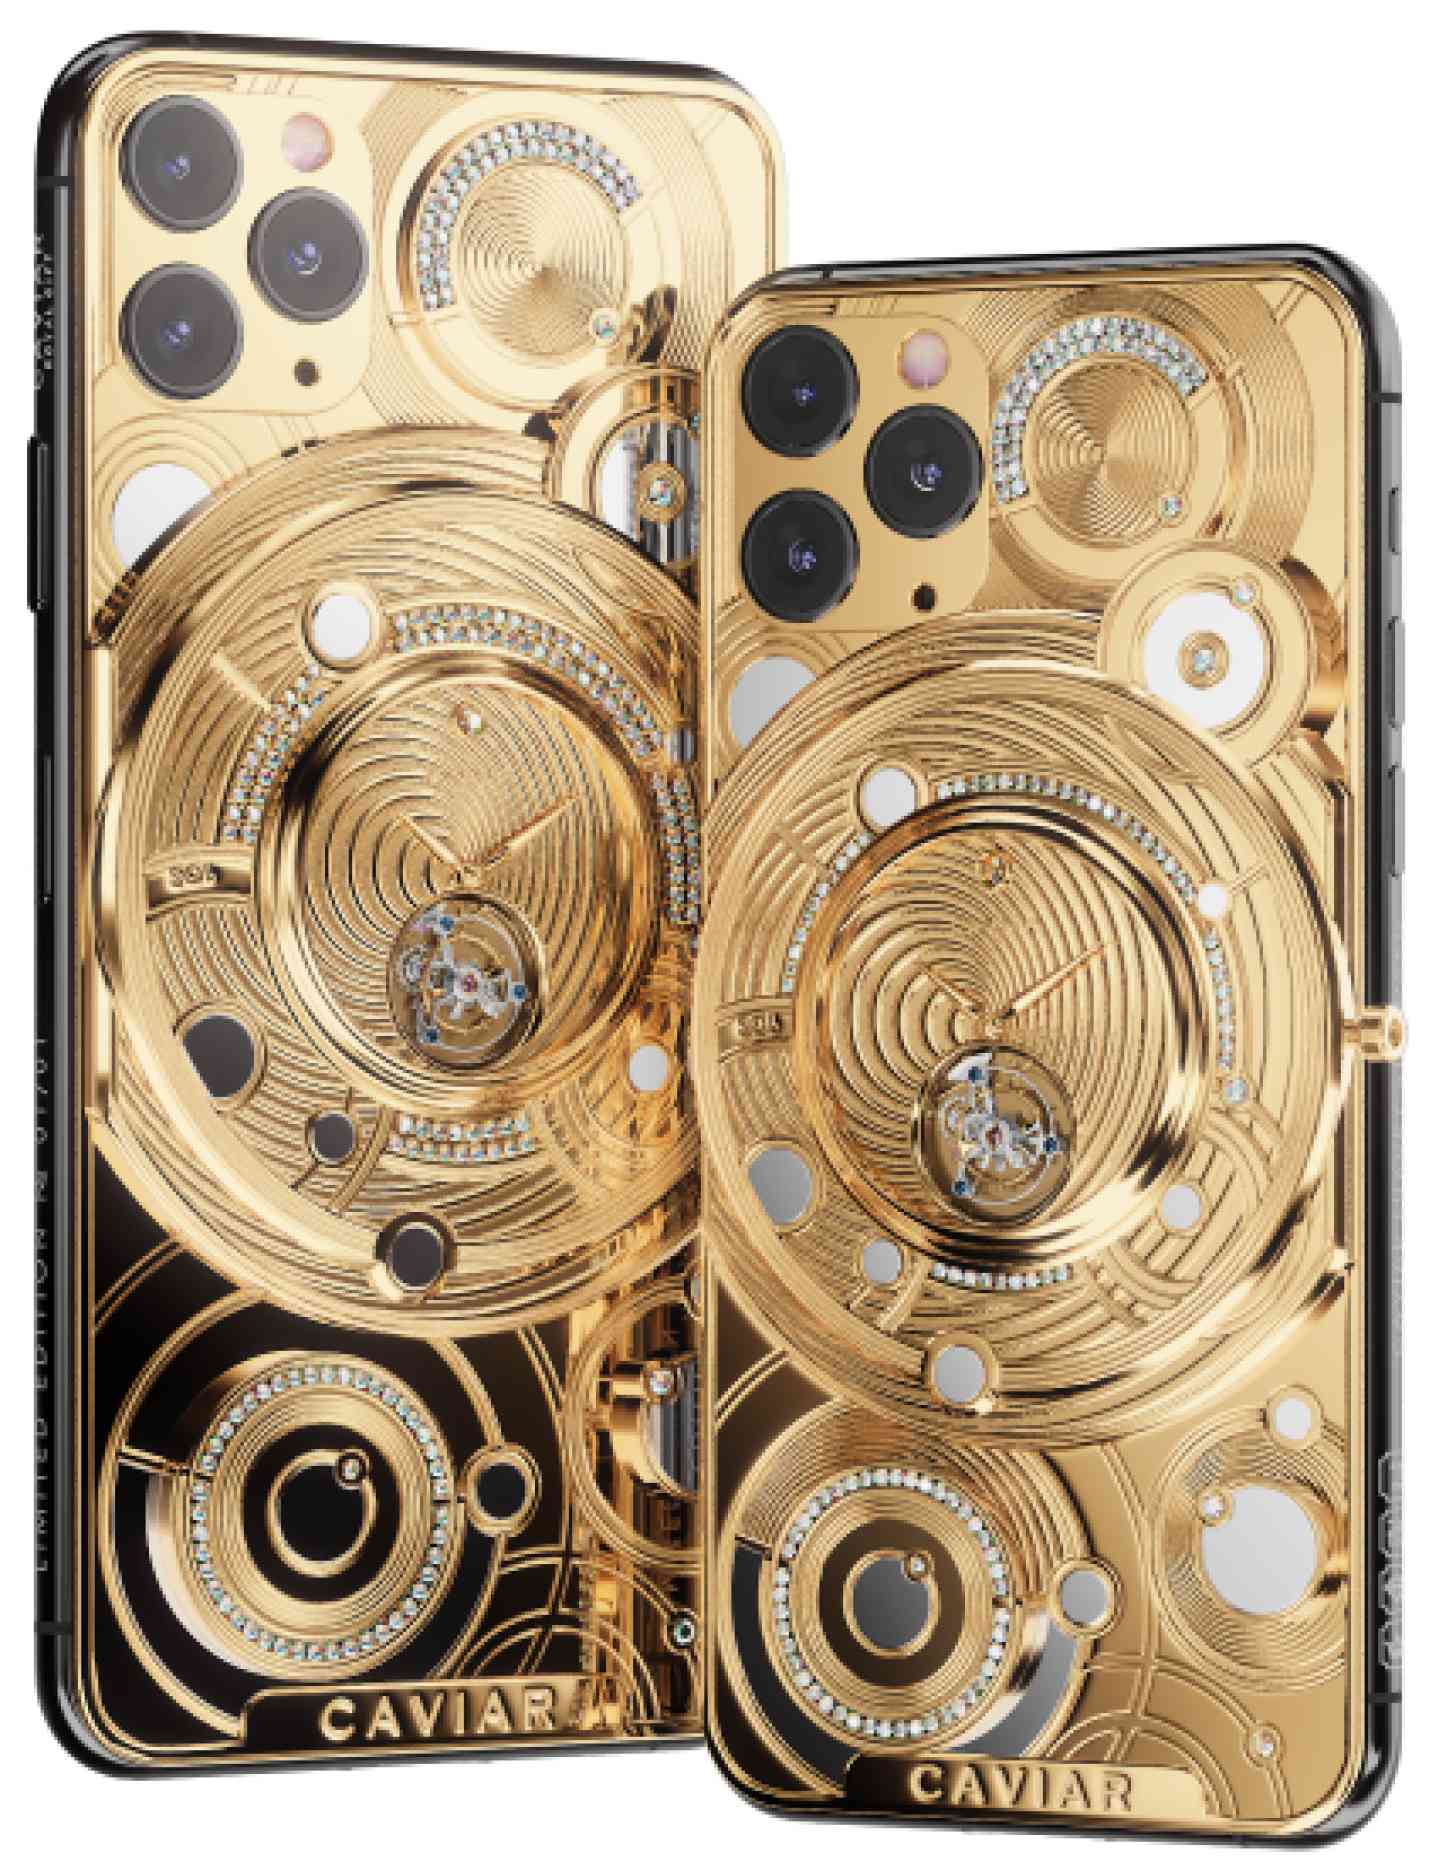 Caviar Unveils Pure Gold Crusted Iphone 11 Pro Model News Wirefly